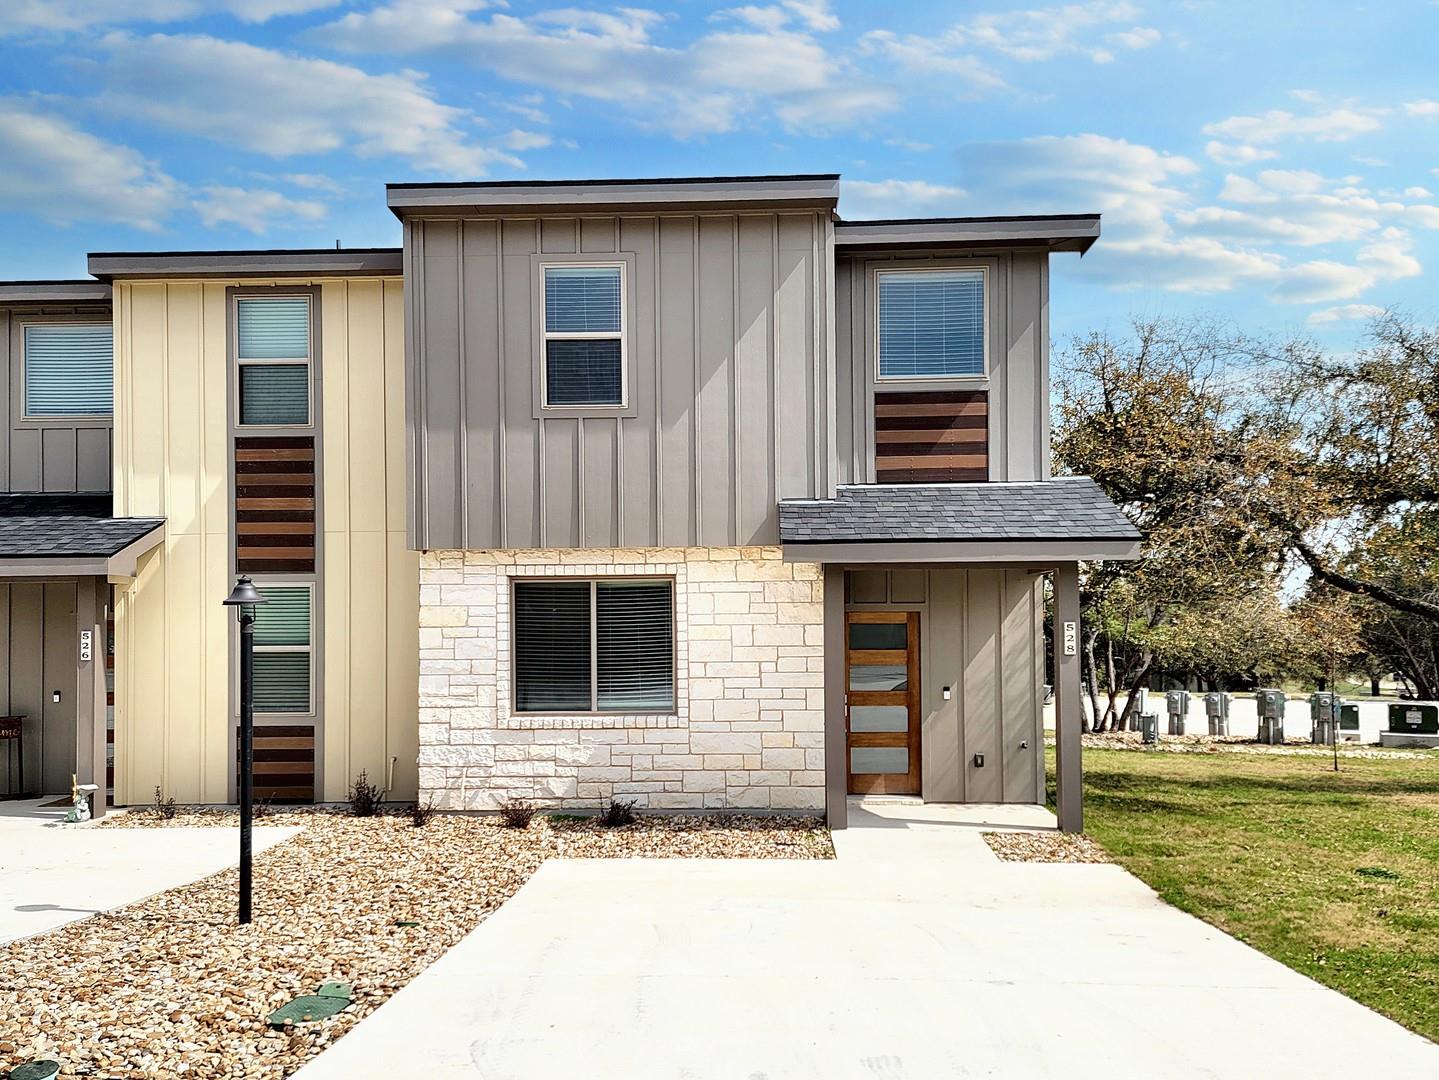 View Point Venture, TX 78645 townhome